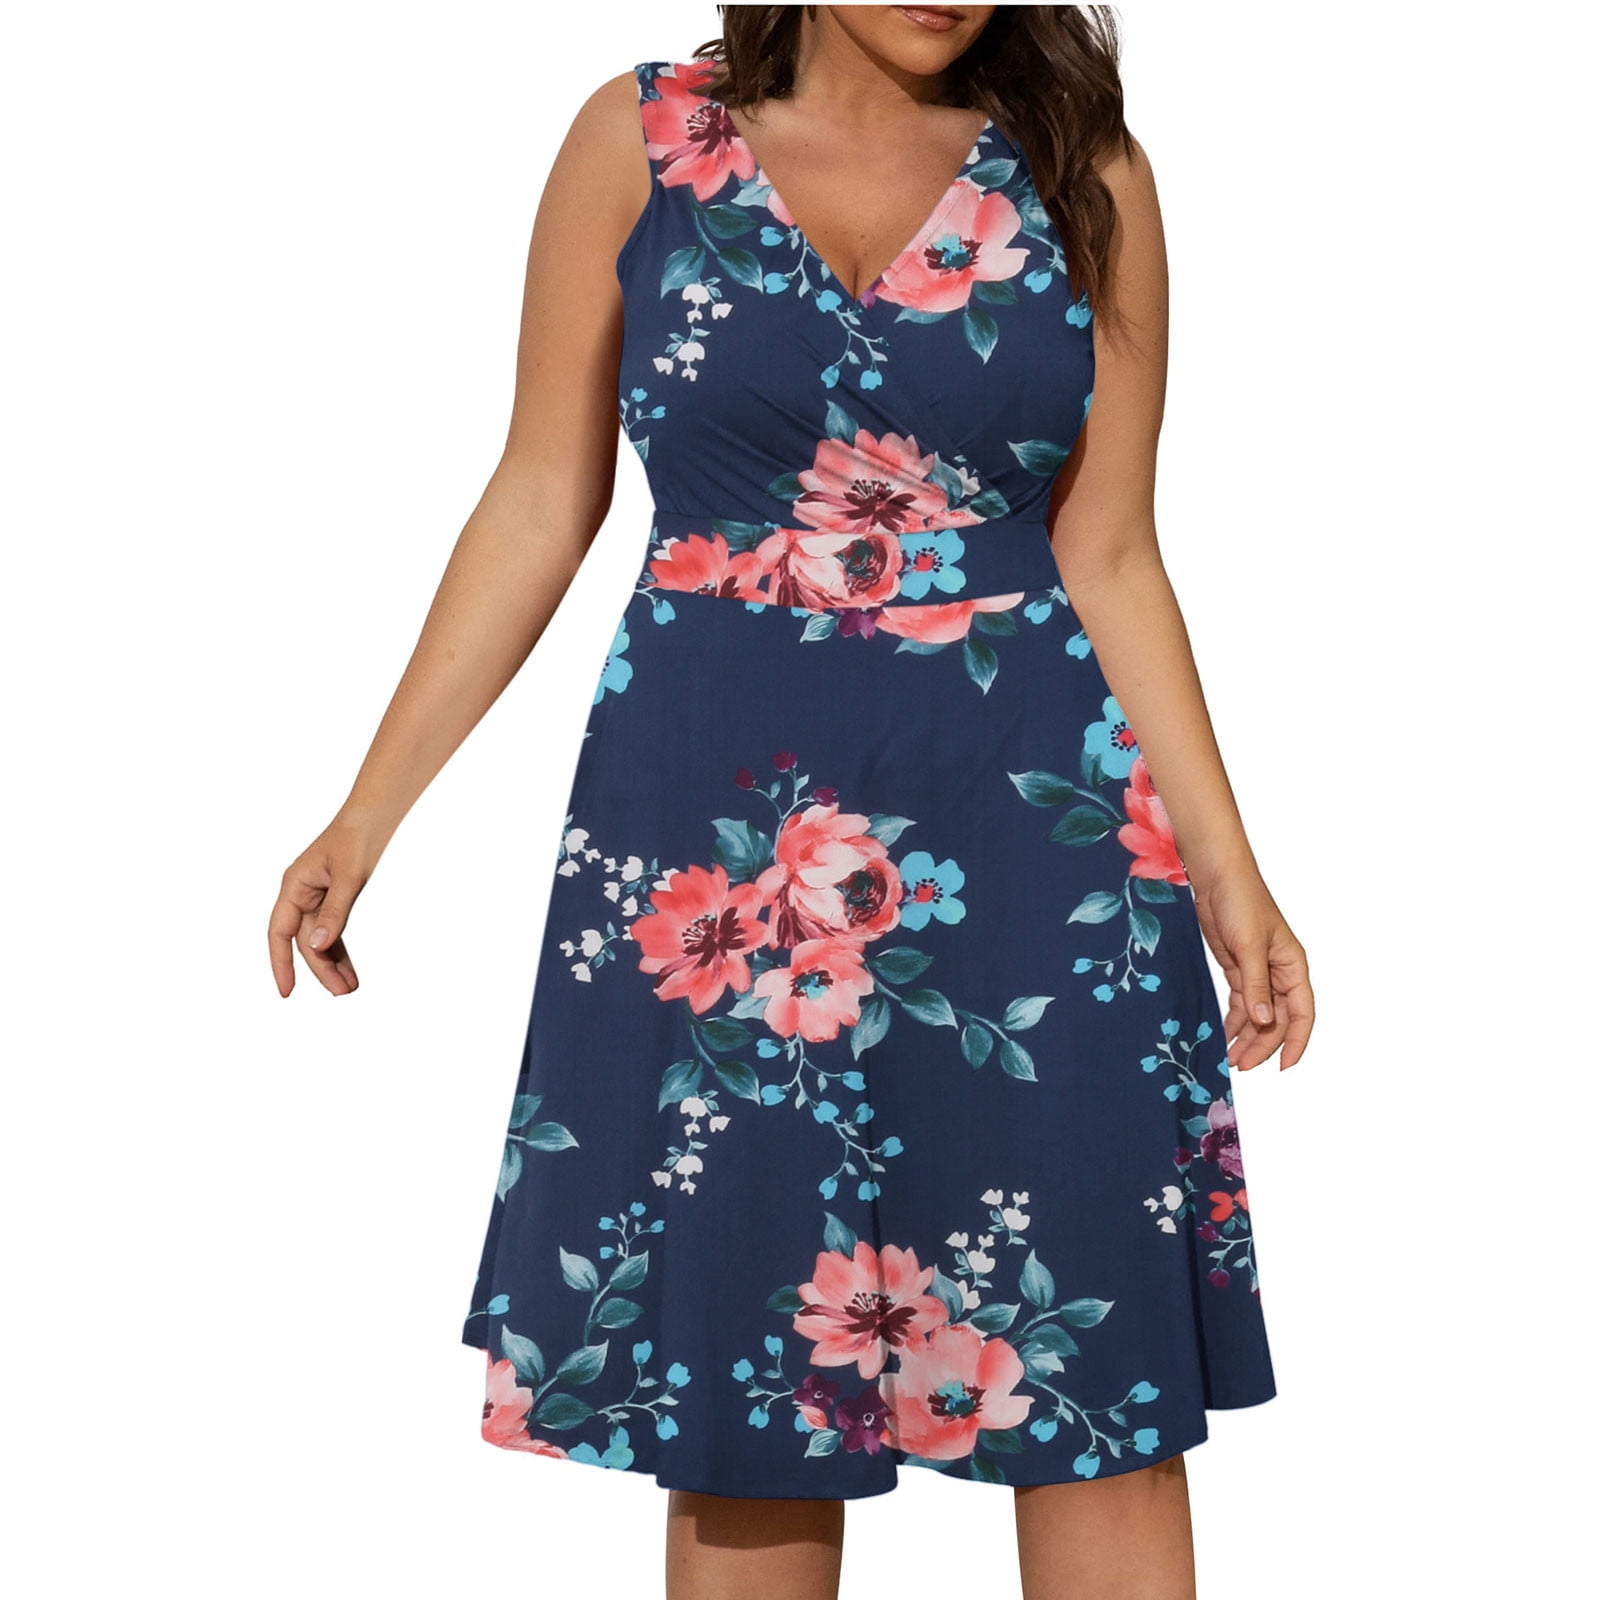 Simplmasygenix Holiday Dresses for Women Clearance Womens Sleeveless  Dresses Clearance Plus Size Sling Belt Floral Print Mini Dress 